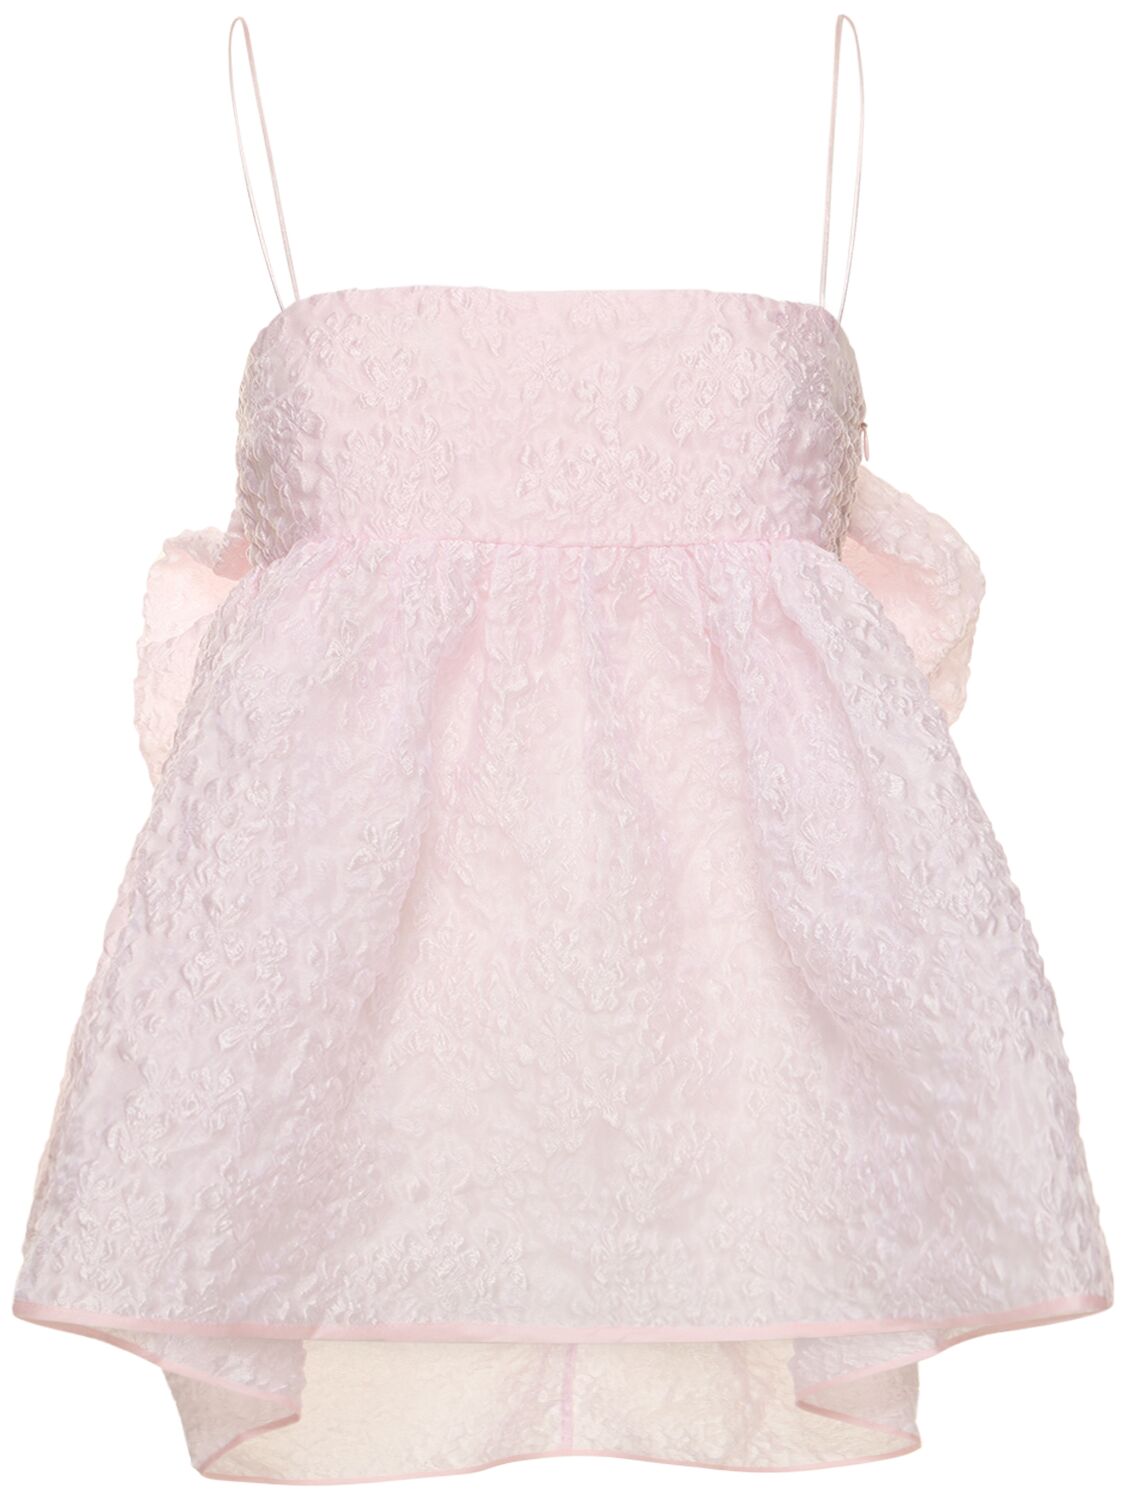 Cecilie Bahnsen Veronica Top W/ Ruffles In Pink